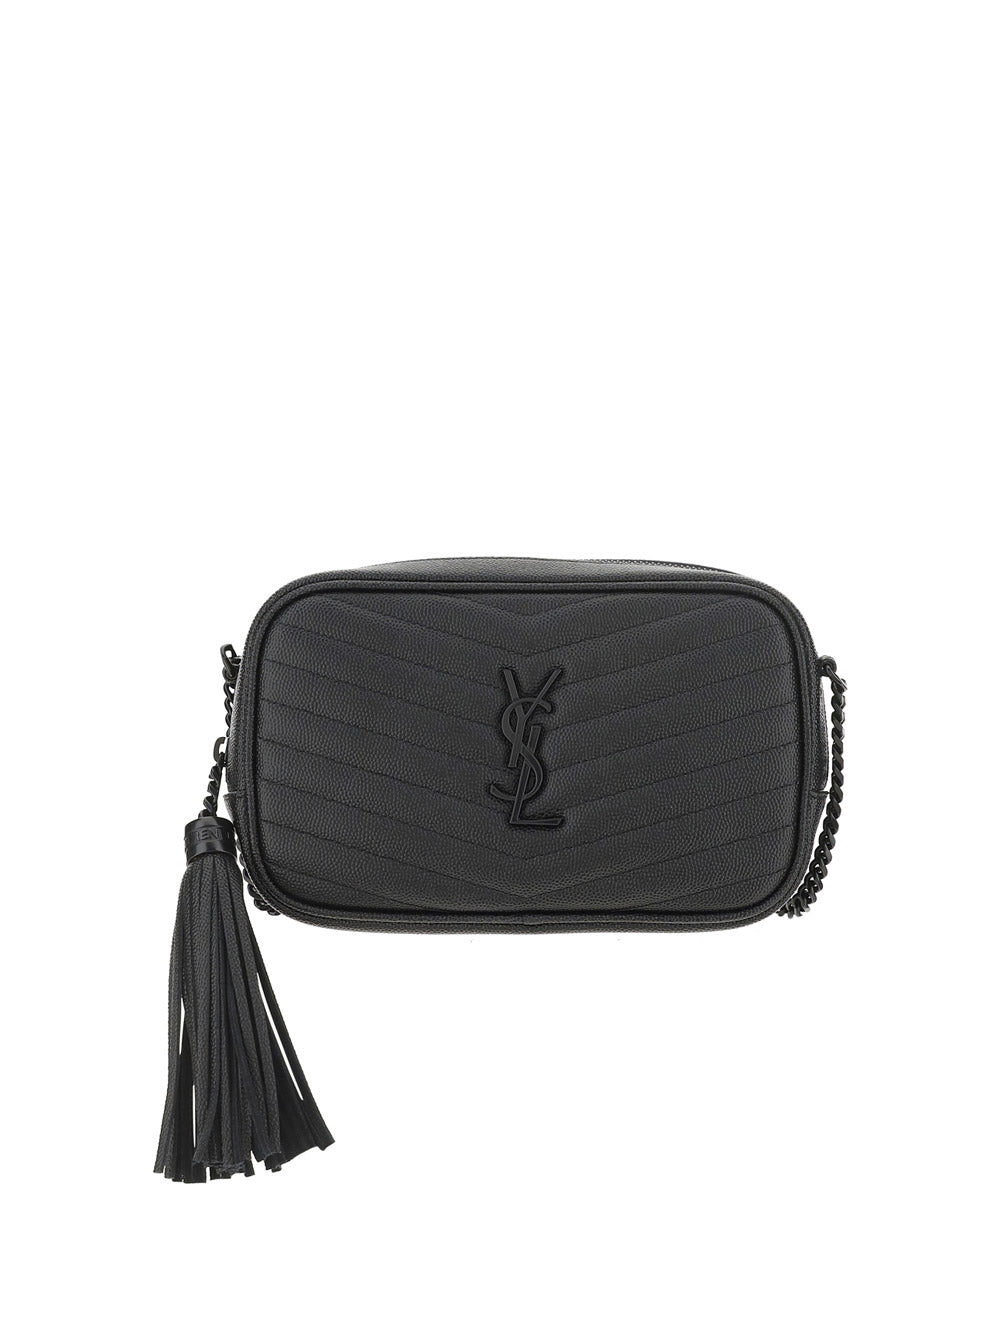 Saint Laurent Lou Mini YSL Quilted Leather Camera Bag